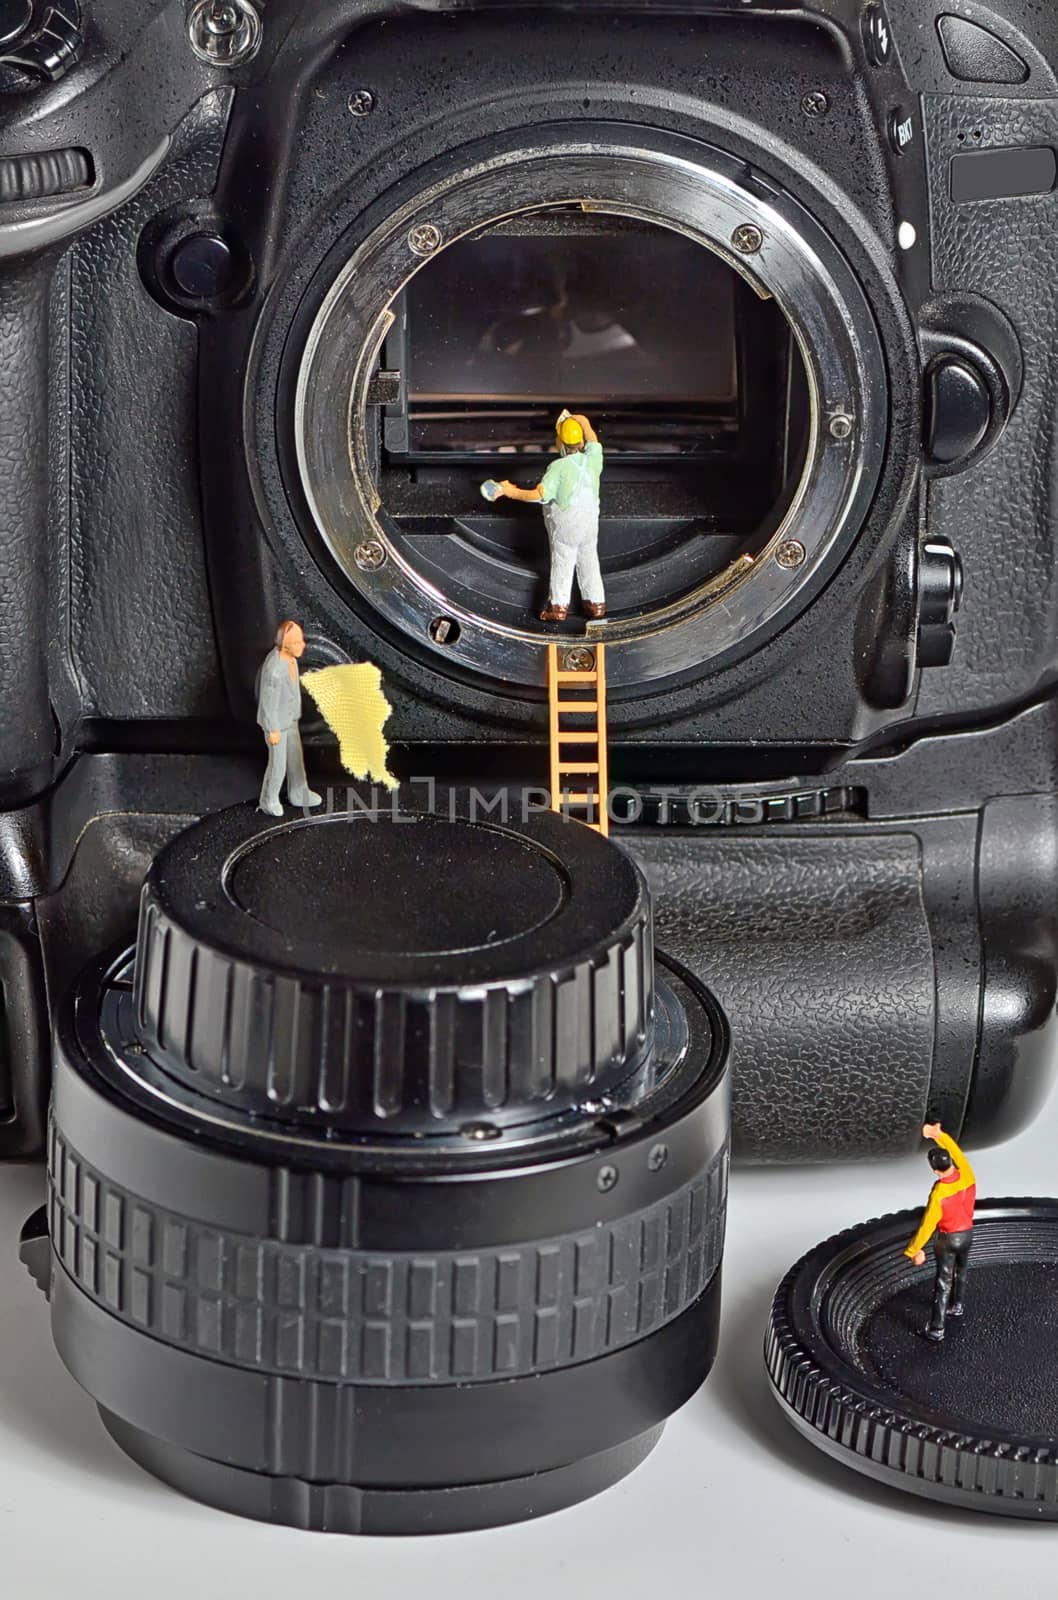 Camera sensor cleaning by figurines